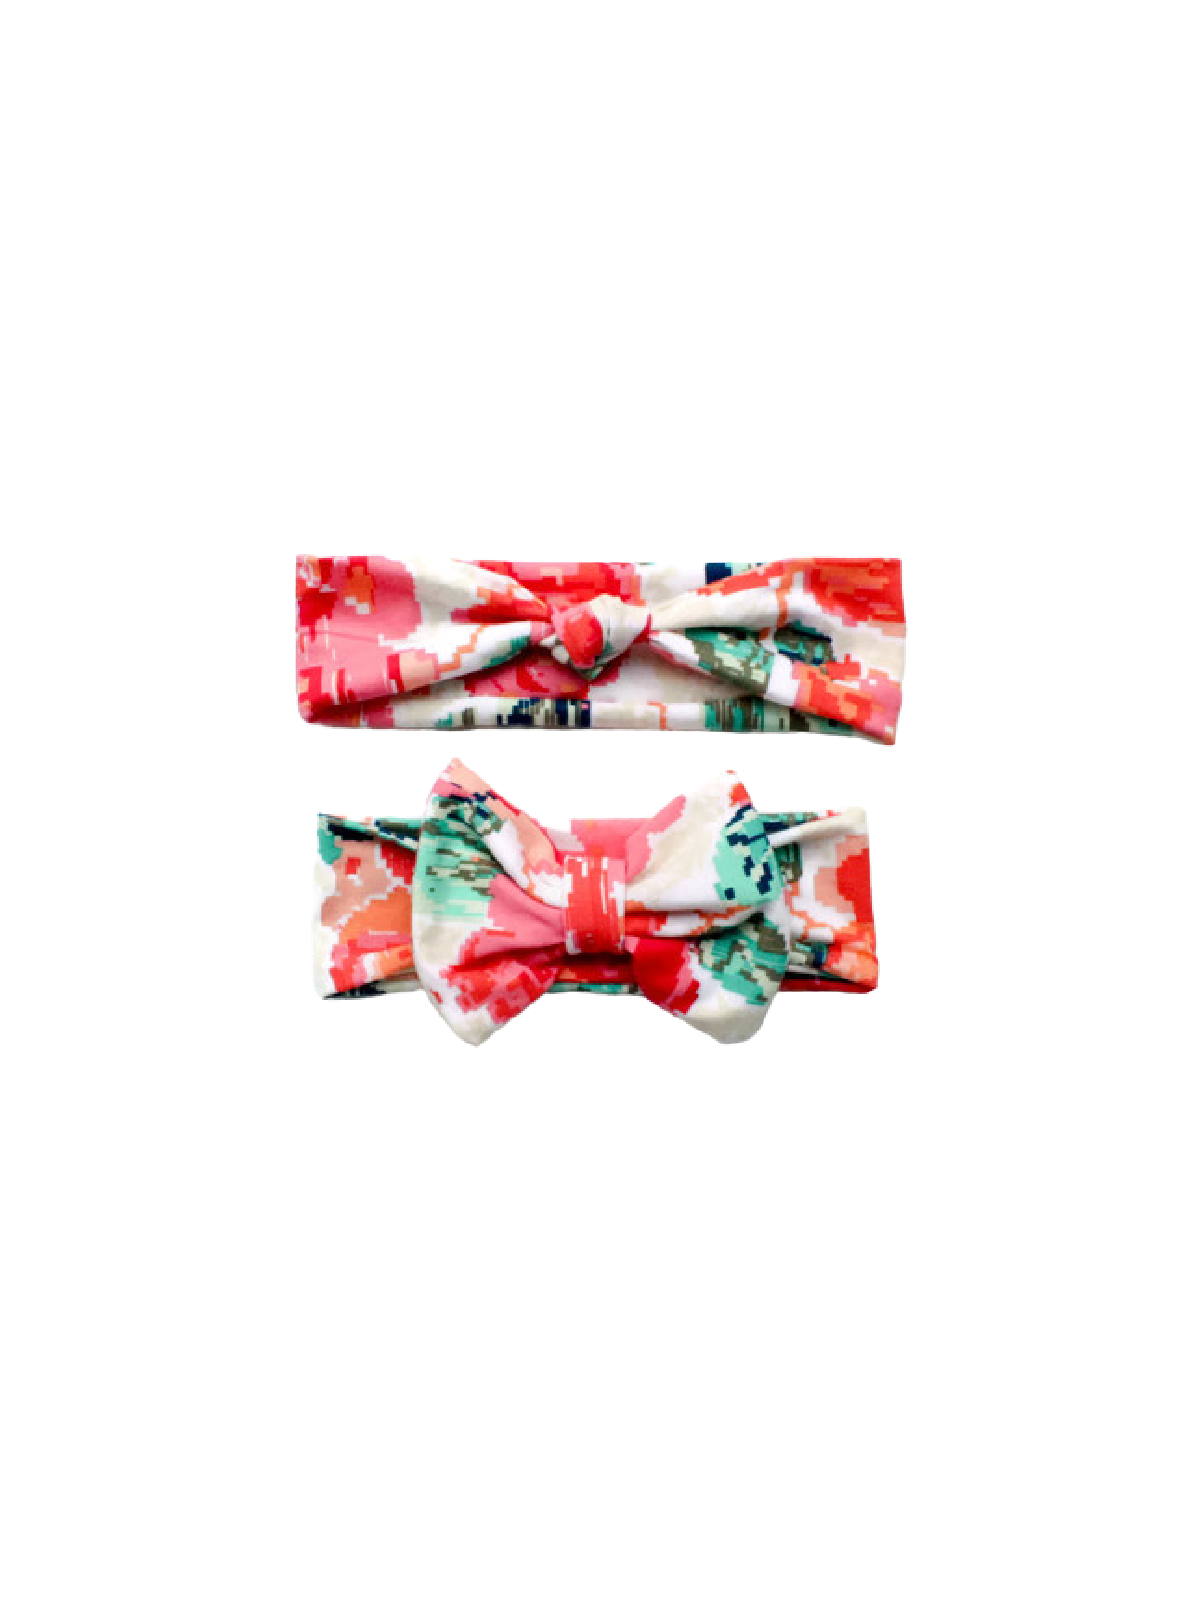 Pixelated Floral Mommy and Me Headbands Set